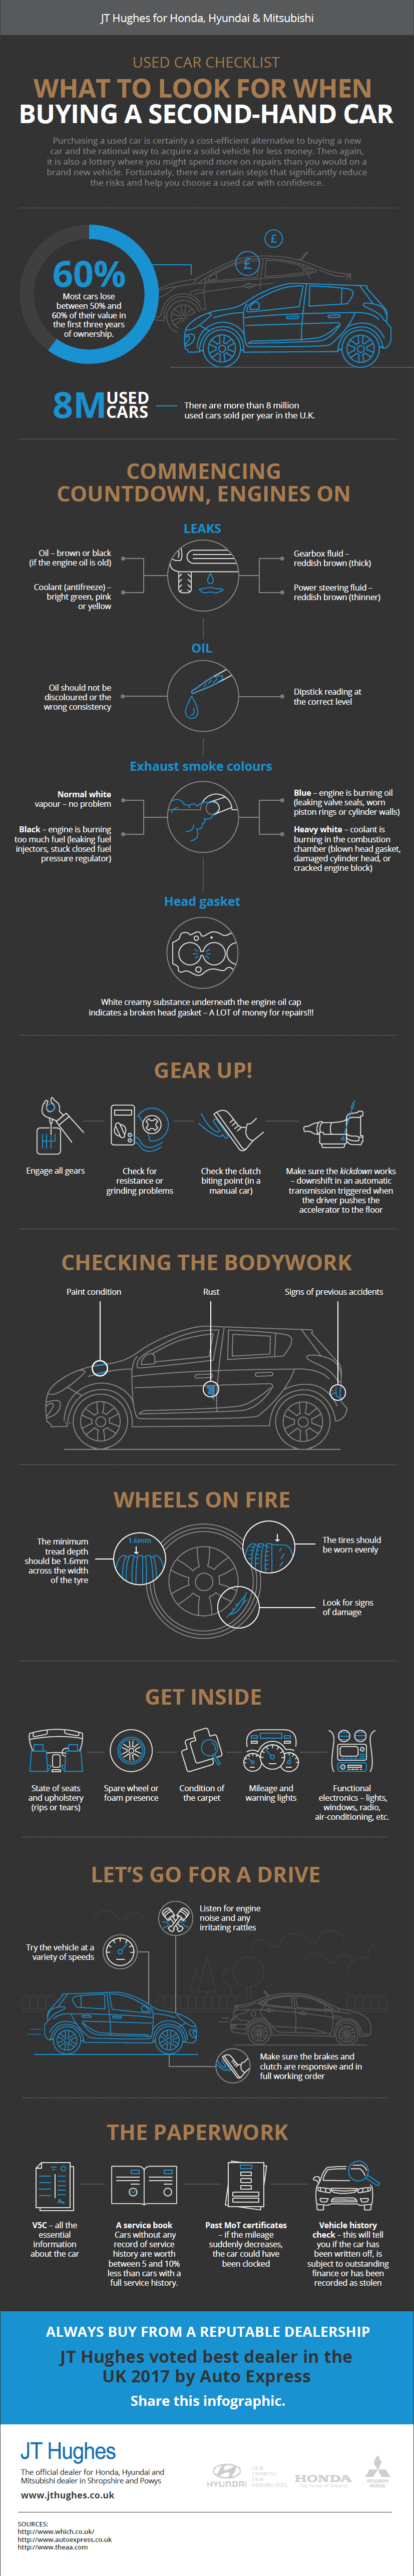 Infographic - Buying a second hand car